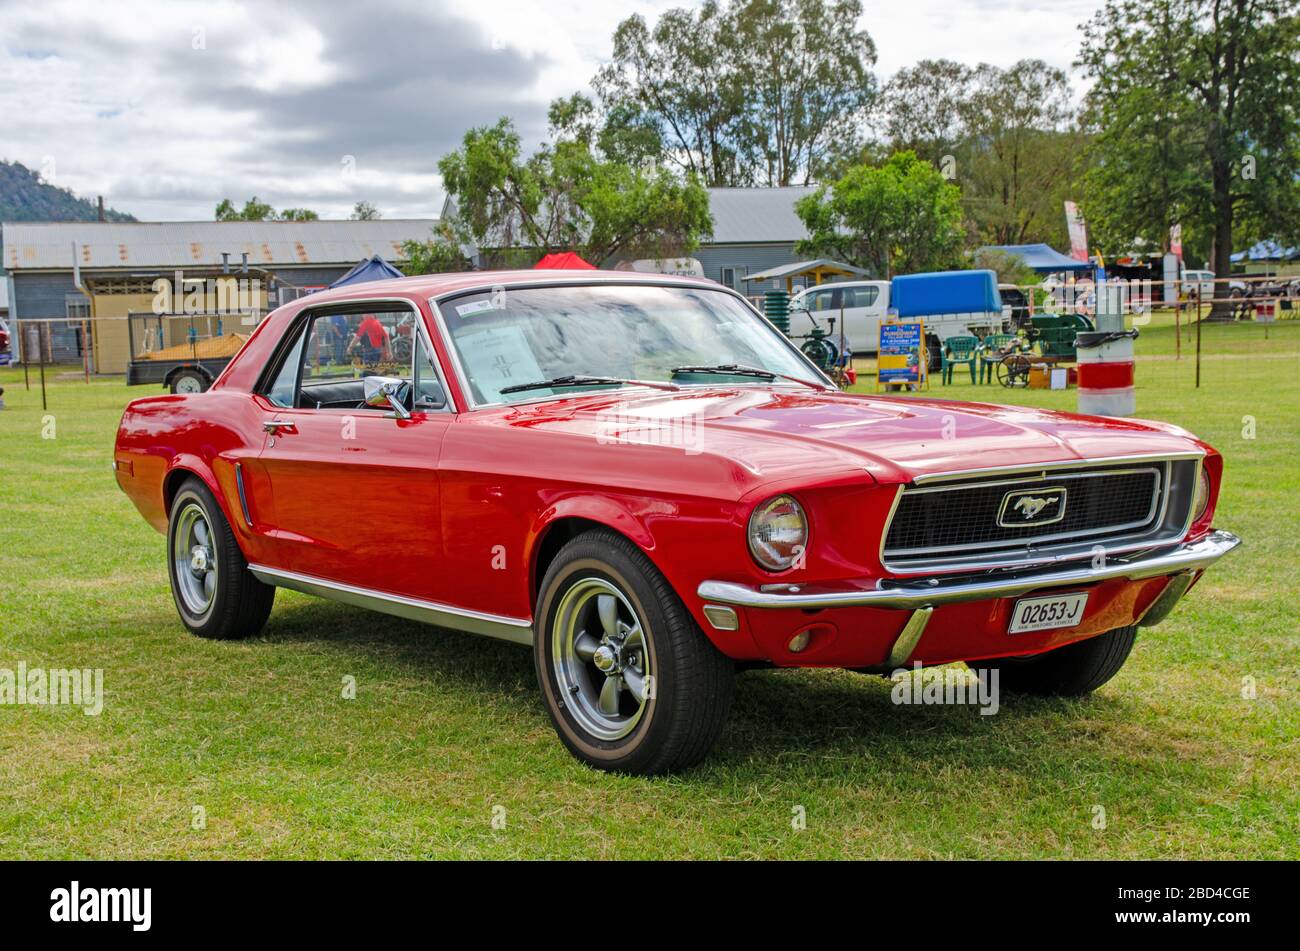 Bright Red 1968 Ford Mustang V8 First Generation Hardtop Coupe. Stock Photo